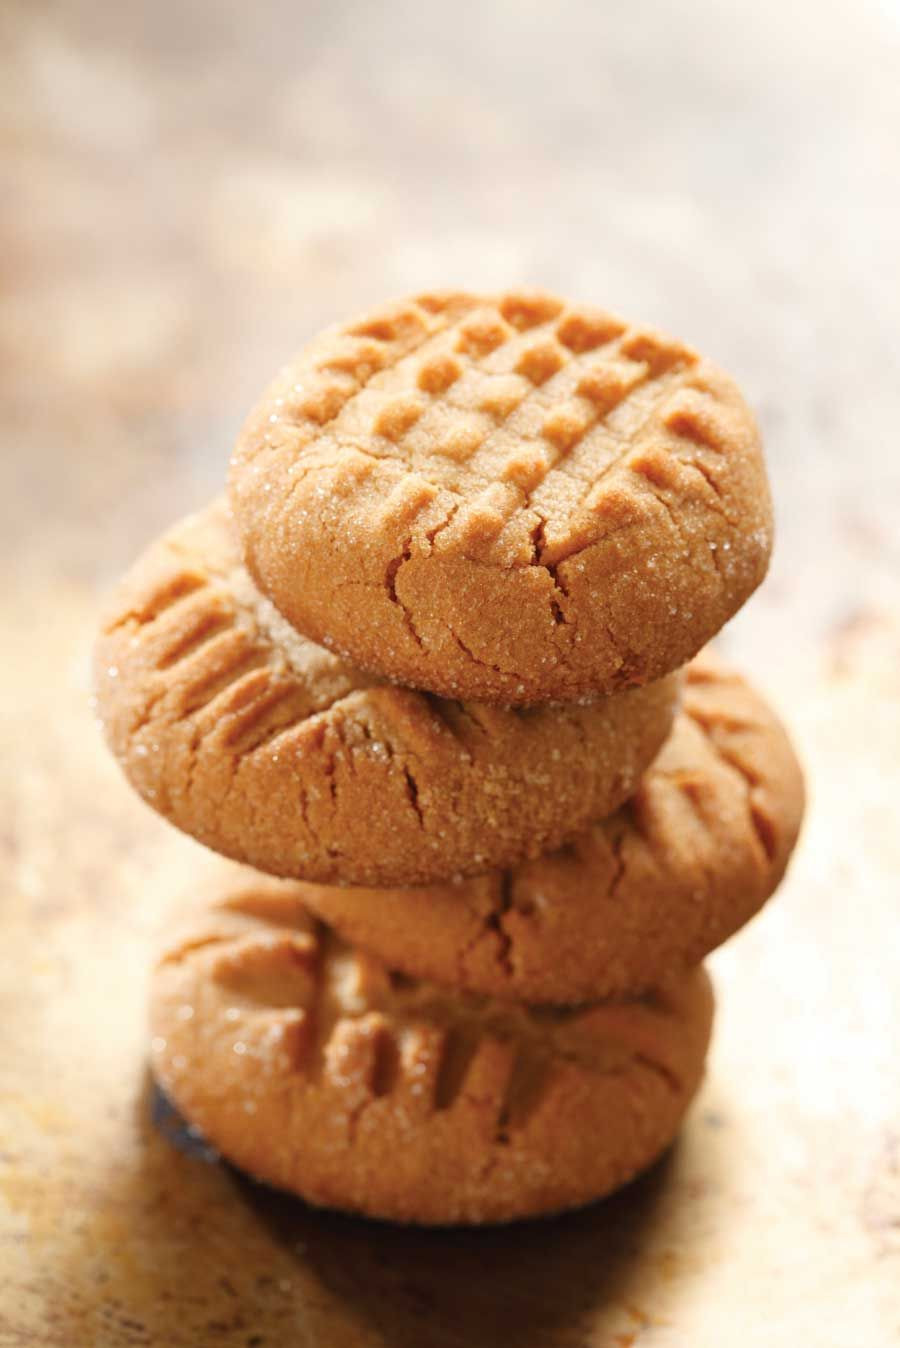 Healthy Peanut Butter Desserts
 healthy peanut butter cookies made with stevia coconut